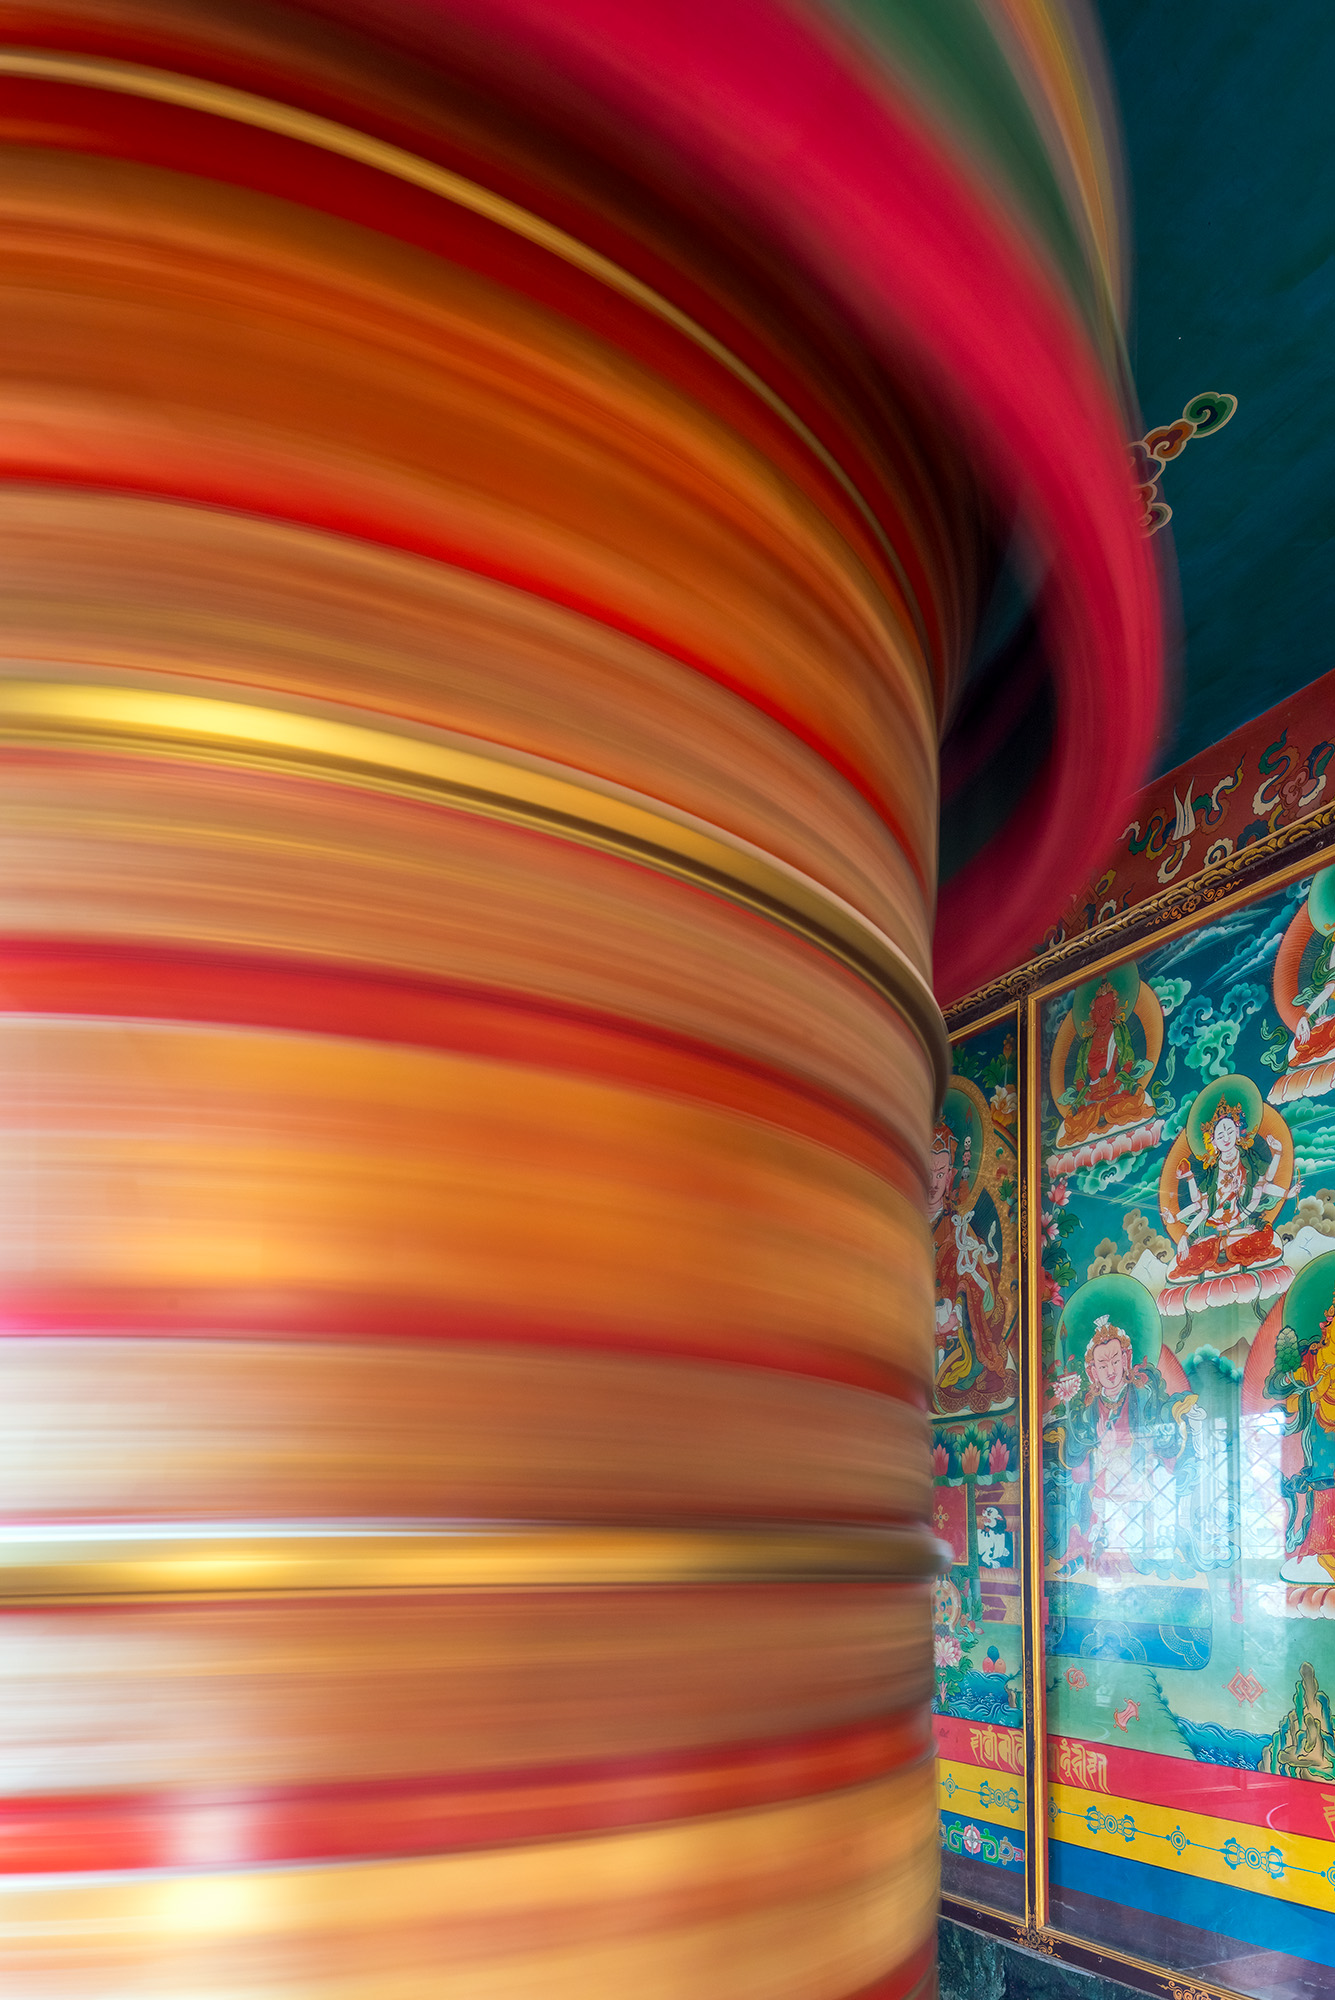 "Spinning Devotion" captures the essence of Kathmandu's Bouddhanath with a towering prayer wheel at its core. Through a long...